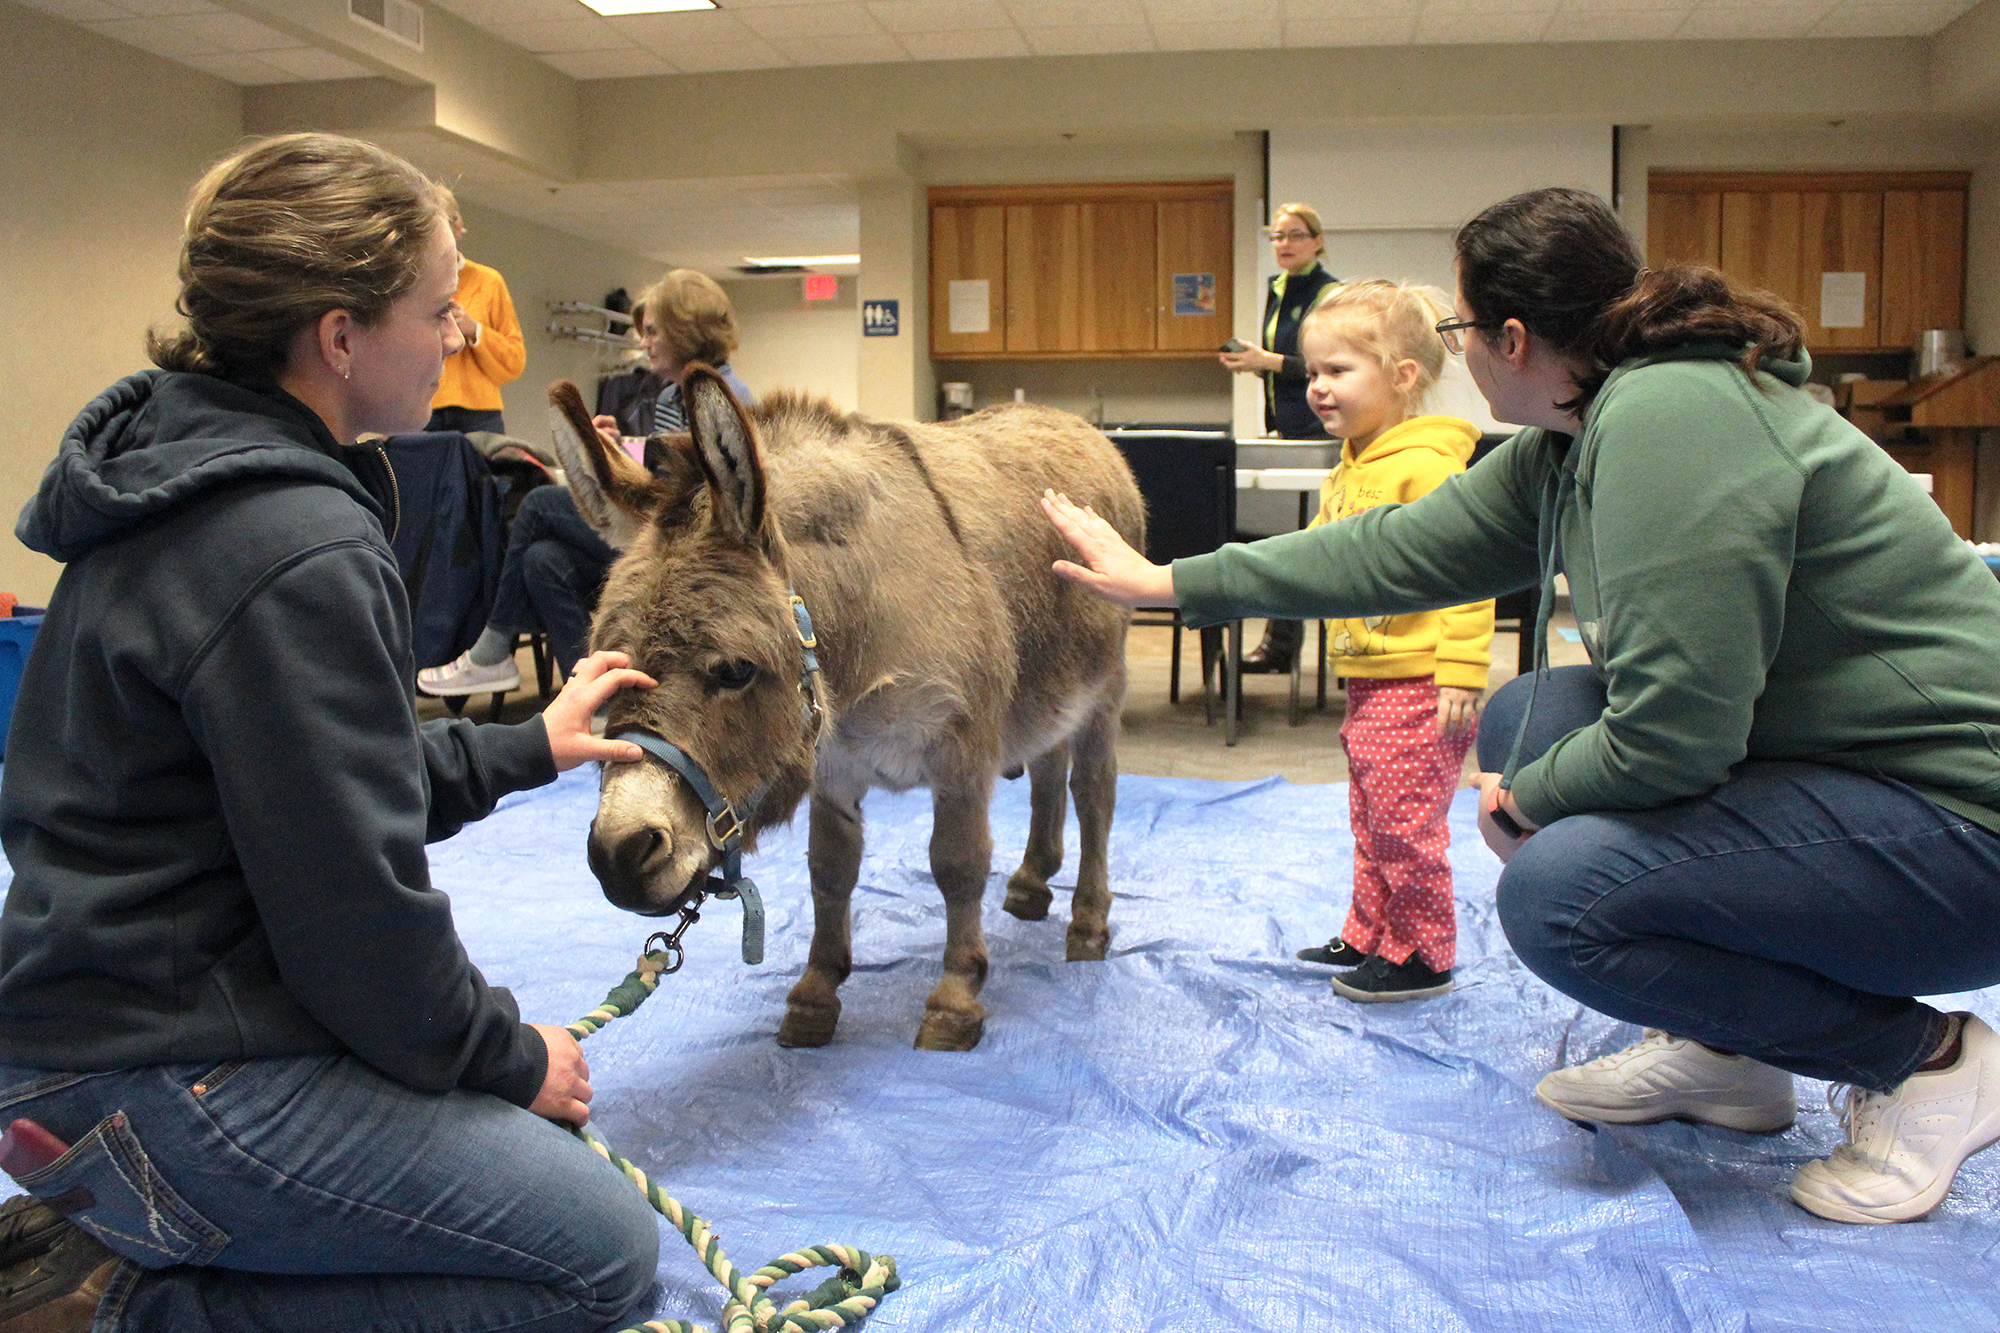 Athalia Blocker (center) with her mother, Jessica (right), is encouraged to touch the soft coat of Franklin the Donkey held by Lexi Schiebout. Mavis Fodness/Rock County Star Herald Photo